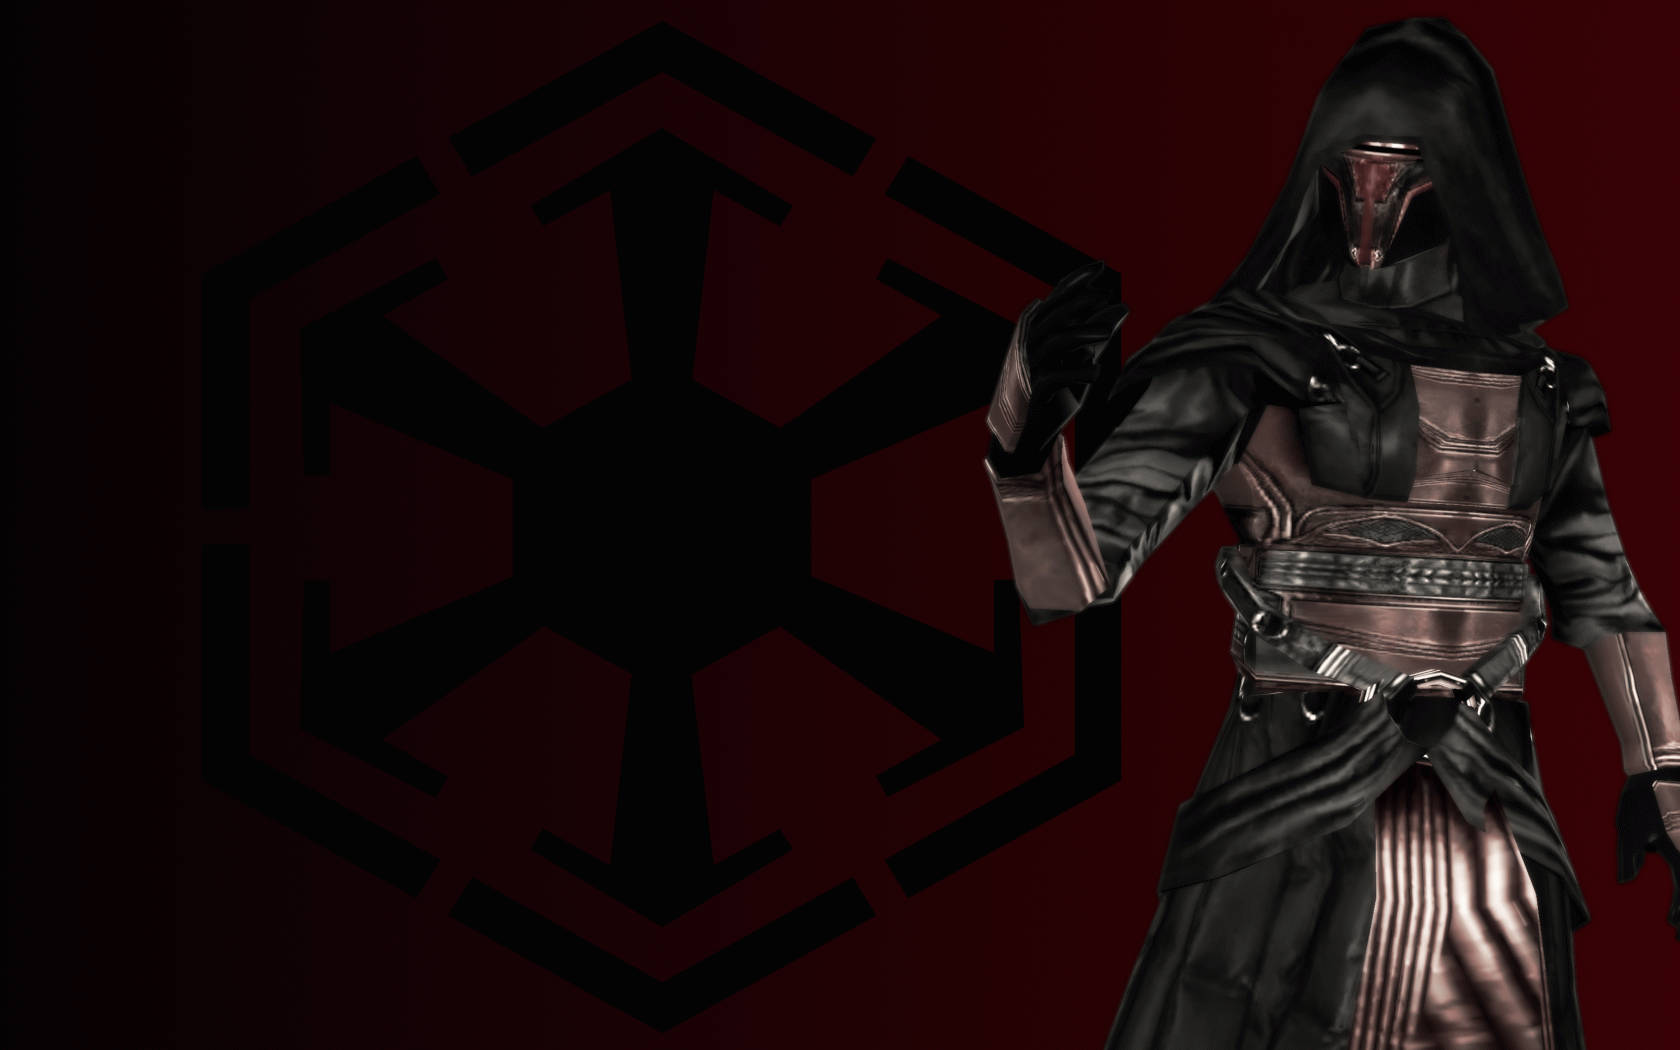 Darth Revan – A Powerful Sith Lord Background